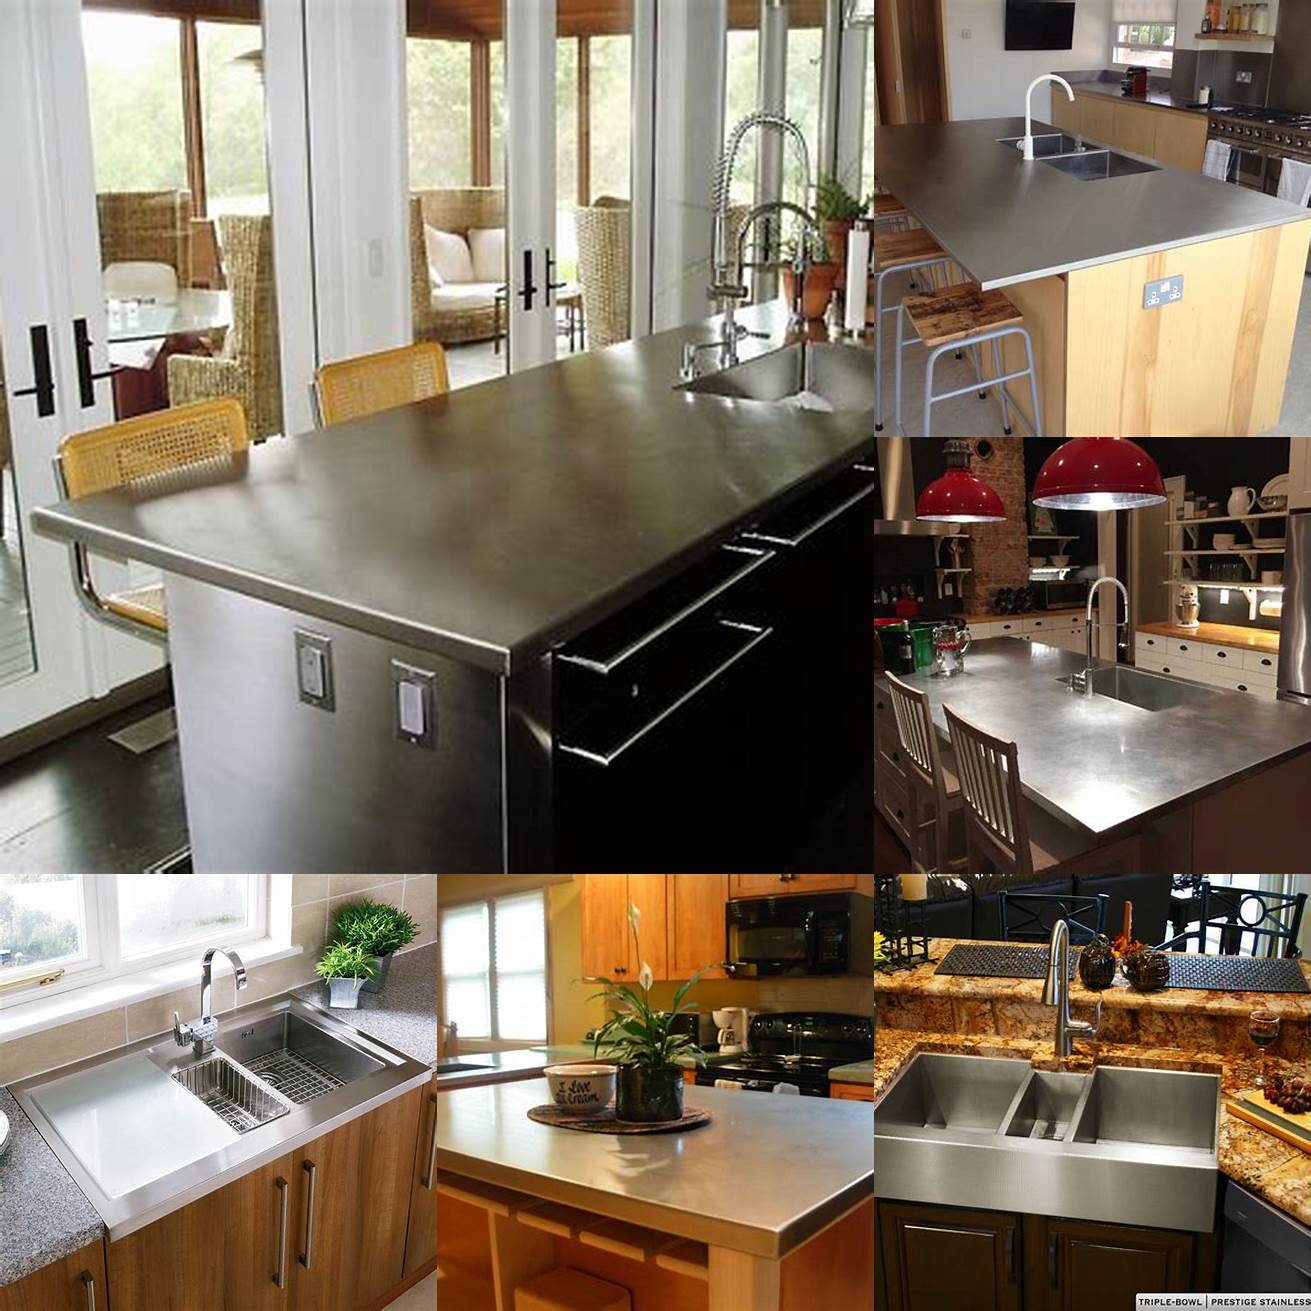 A stainless steel kitchen island with a built-in sink